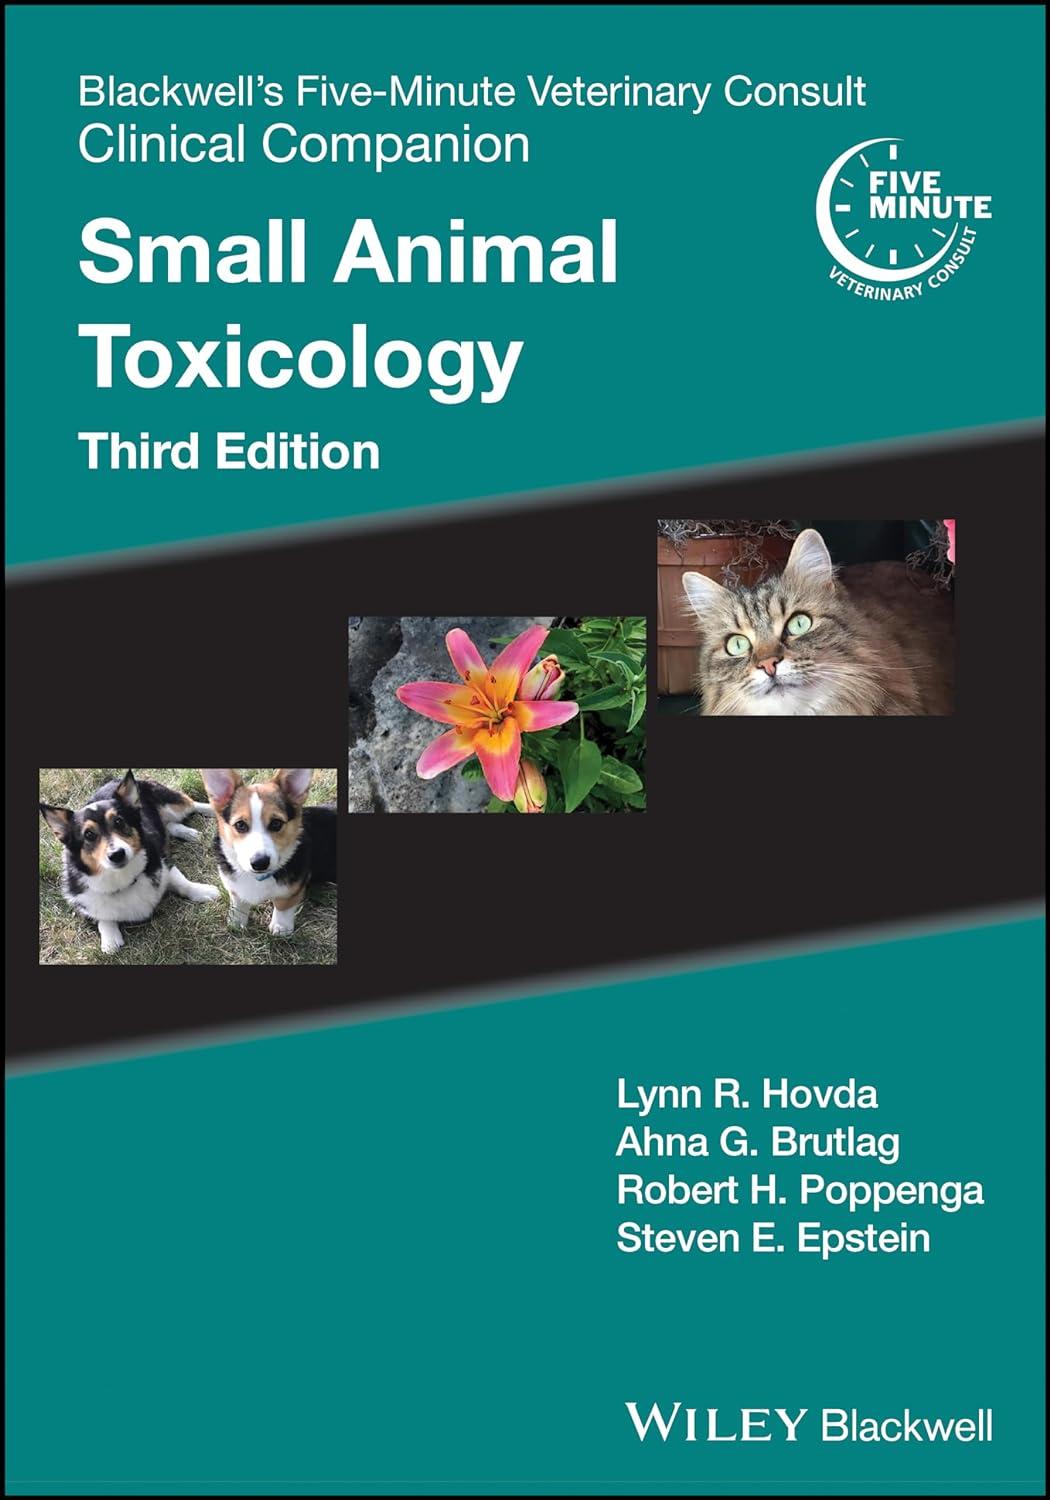 blackwells five-minute veterinary consult clinical companion small animal toxicology 3rd edition lynn r.